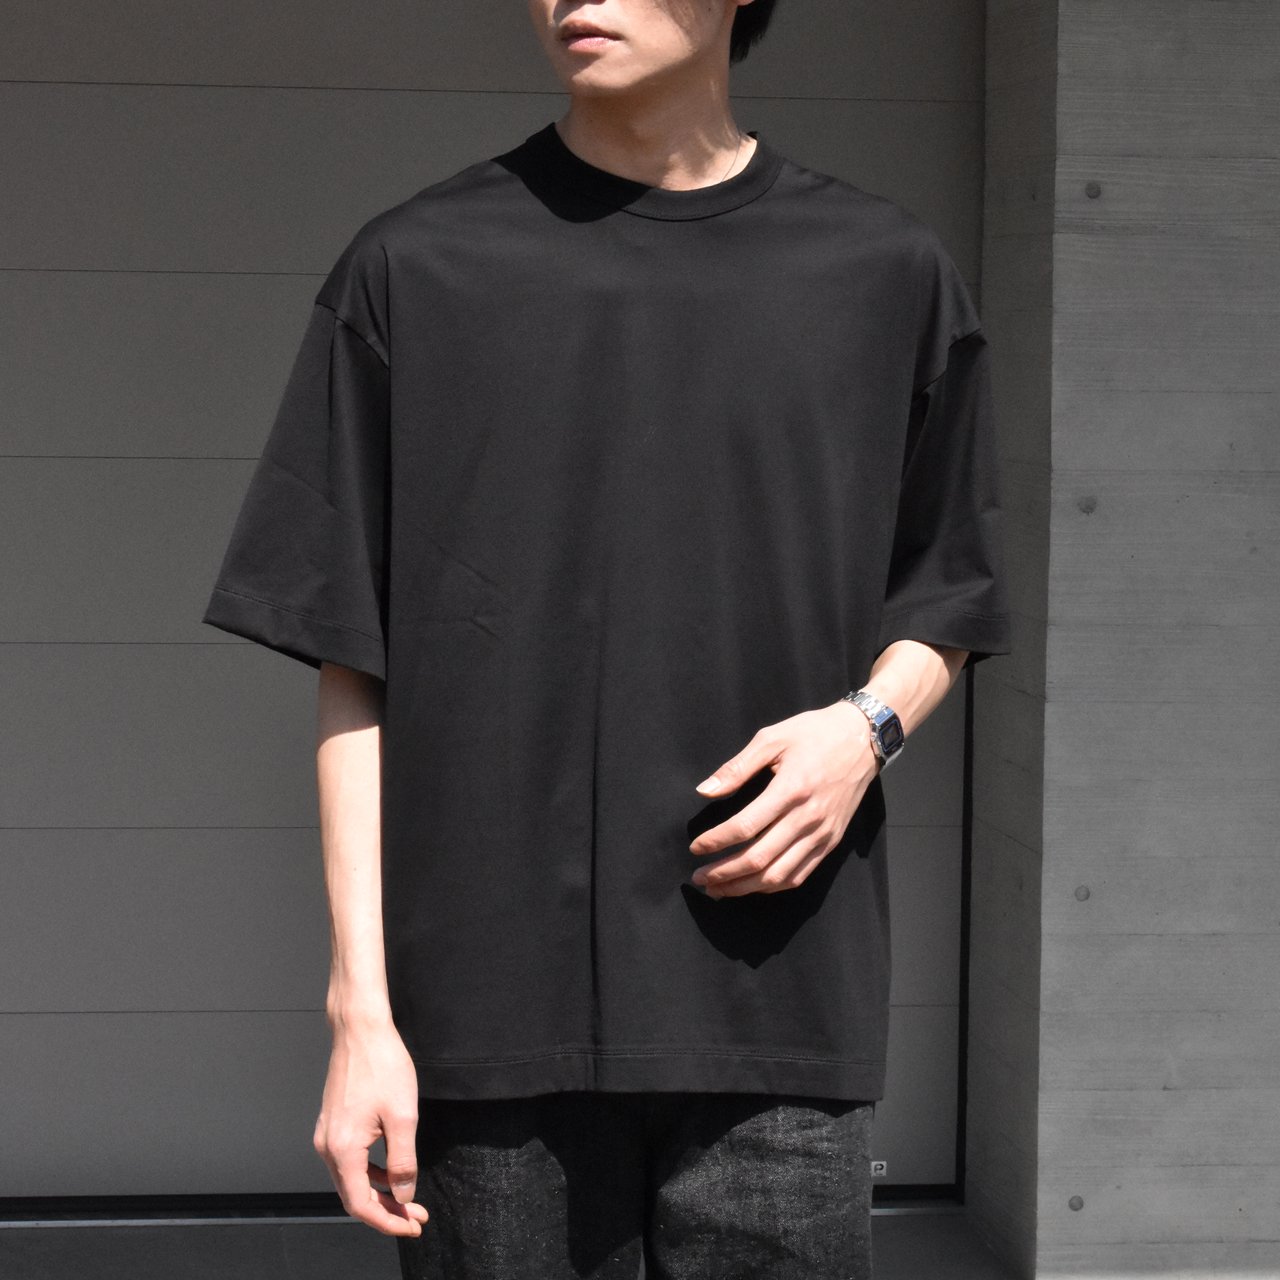 <img class='new_mark_img1' src='https://img.shop-pro.jp/img/new/icons5.gif' style='border:none;display:inline;margin:0px;padding:0px;width:auto;' />MARKAWARE (ޡ)COMFORT FIT Tee BLACK -ORGANIC GIZA 80/2 KNIT-